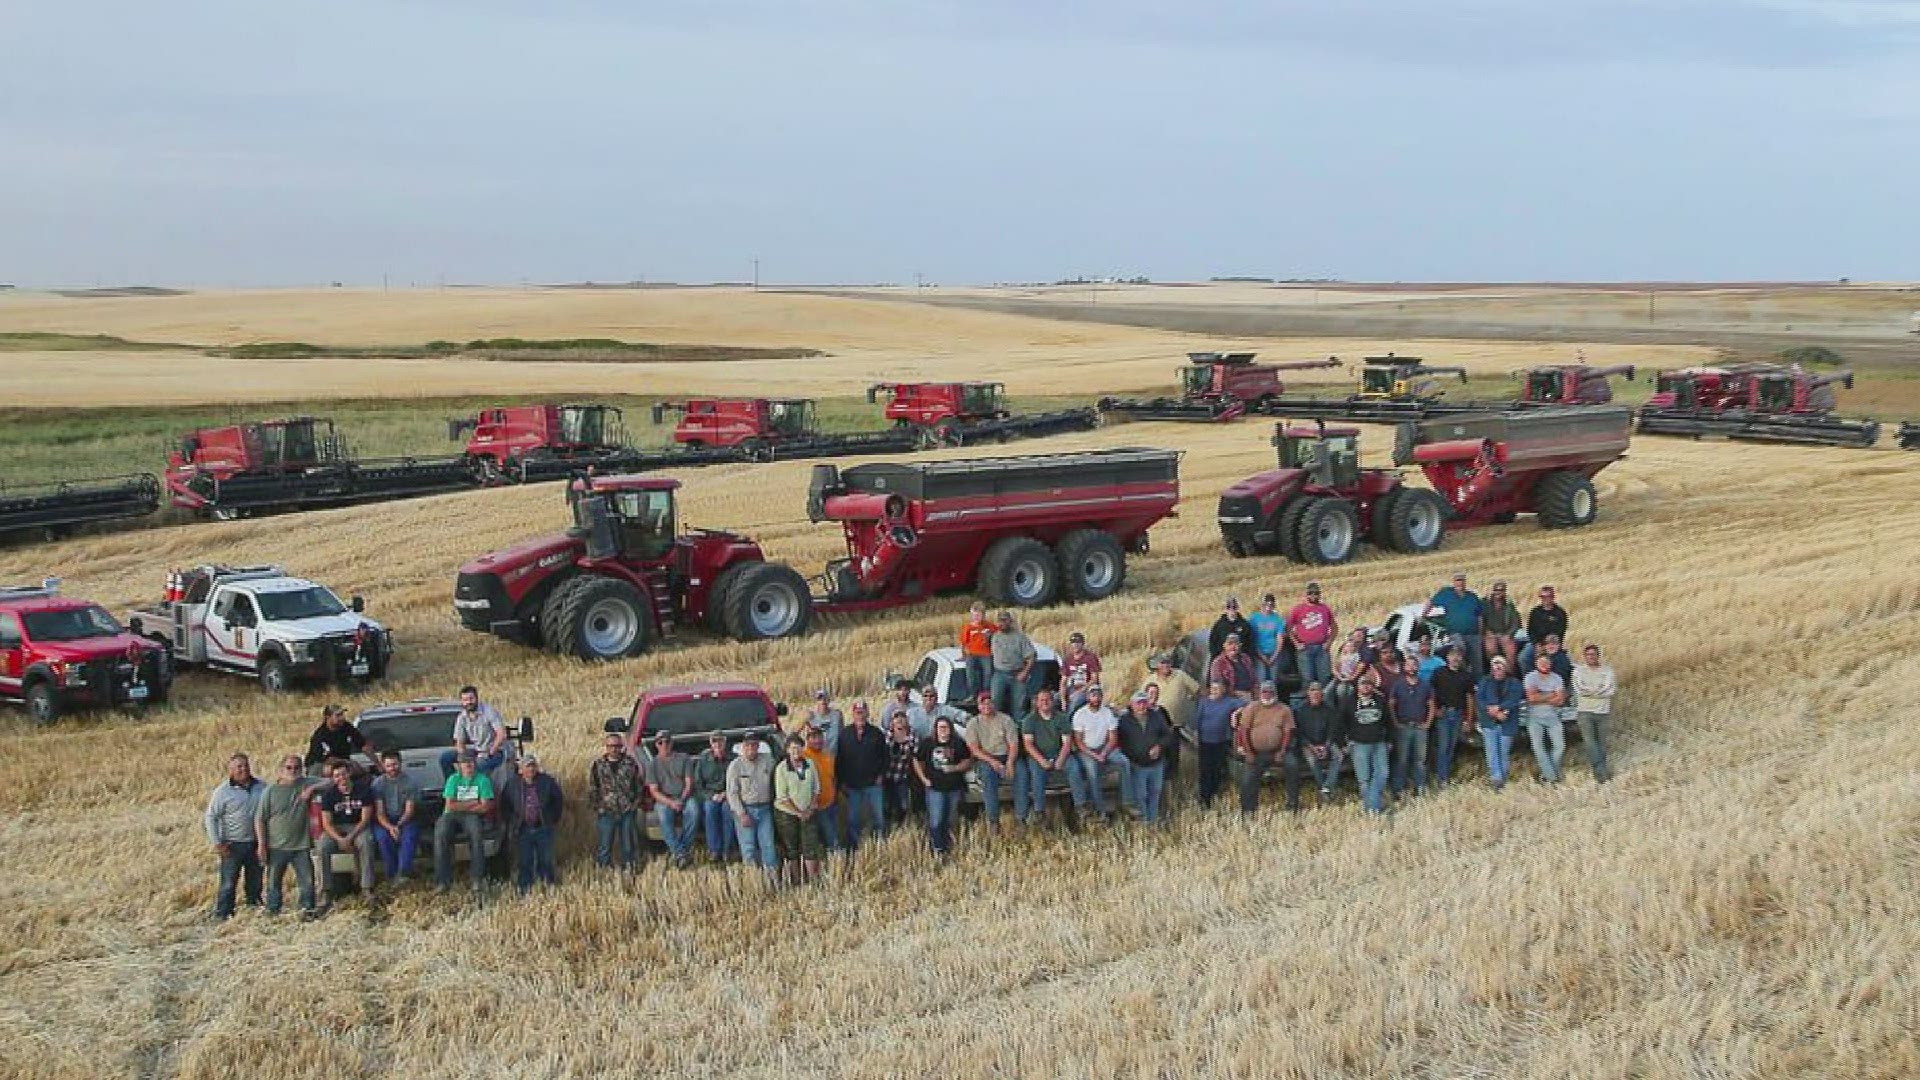 About 60 farmers from across the county spent seven hours harvesting wheat and canola on Lane Unhjem's land.